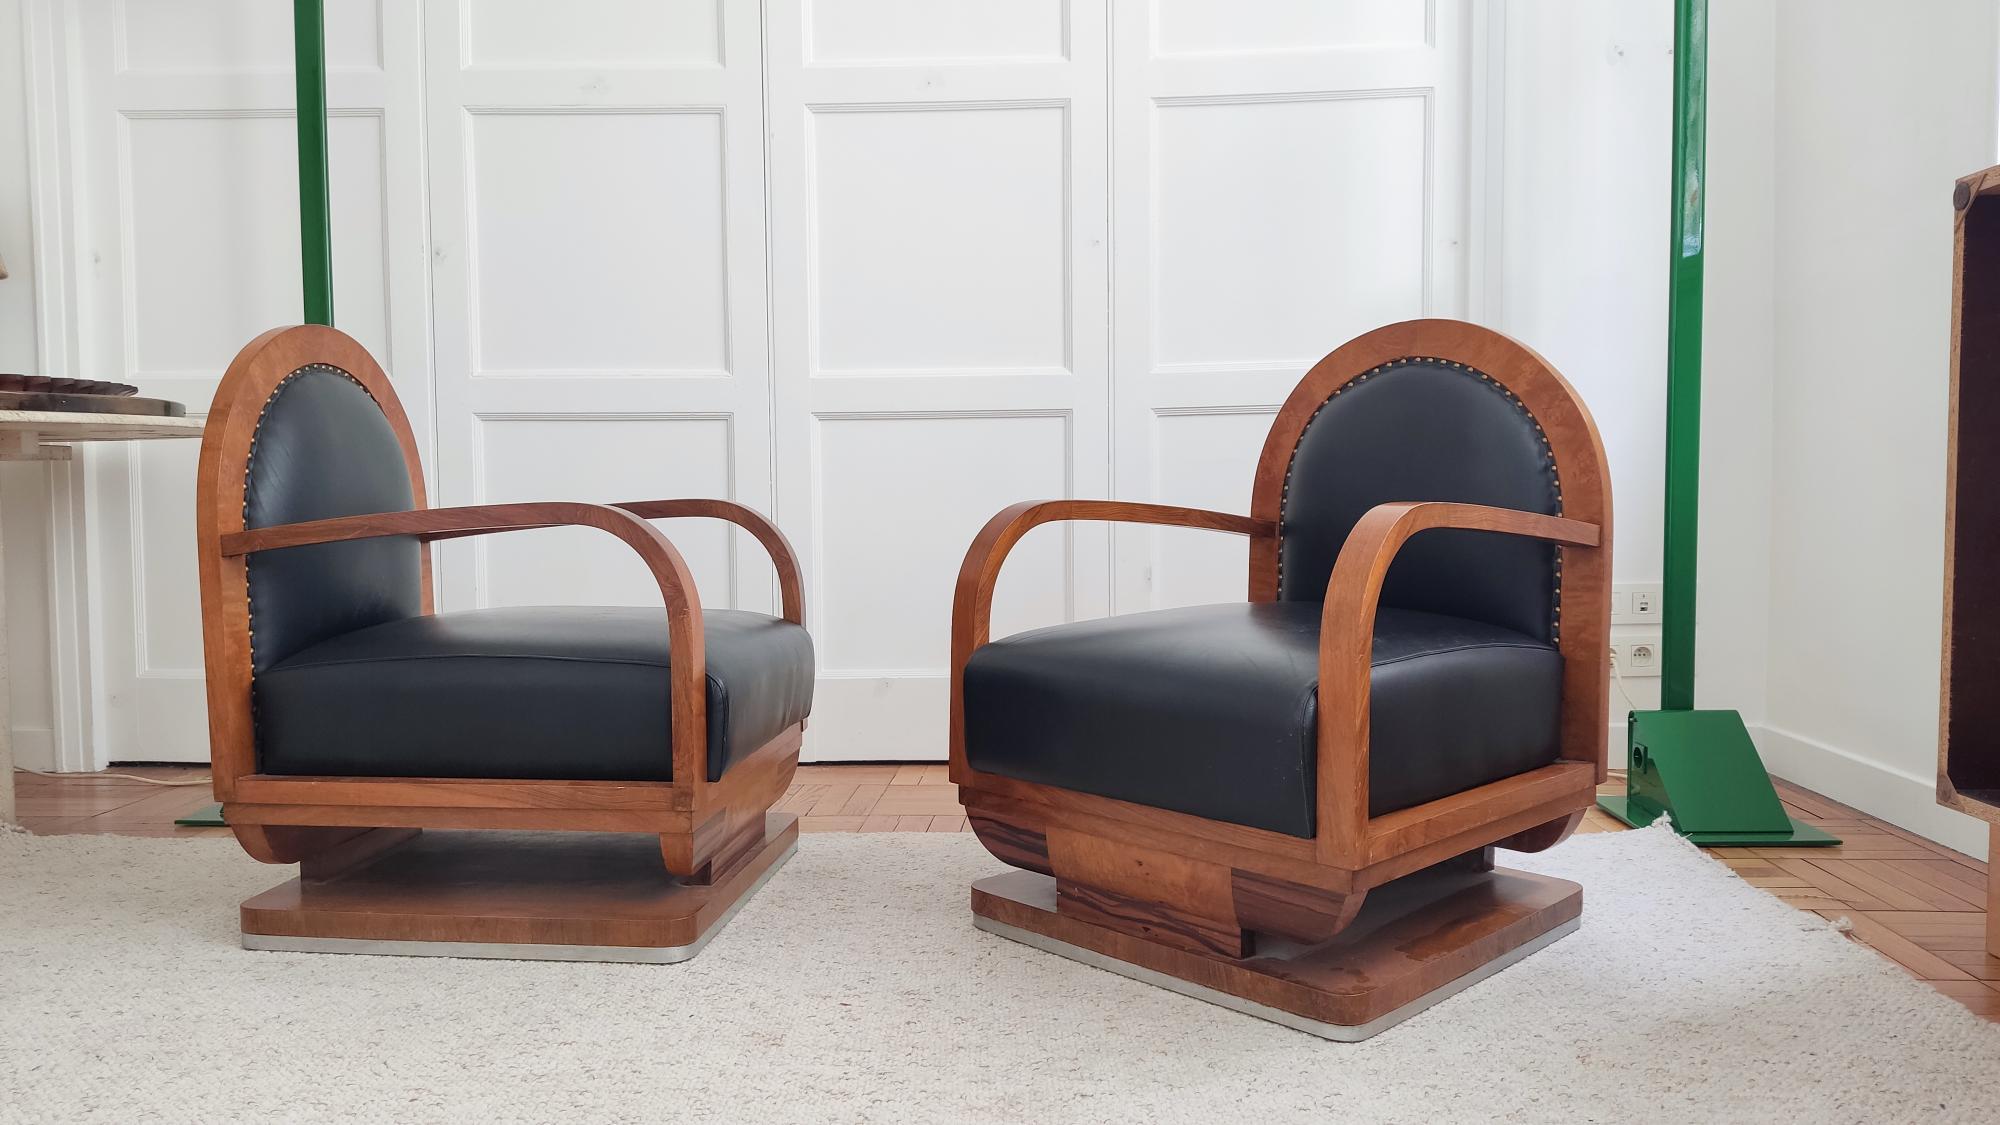 Elegant pair of rounded armchairs in an art deco style. Nice wood work, especially with veined details at the feet.